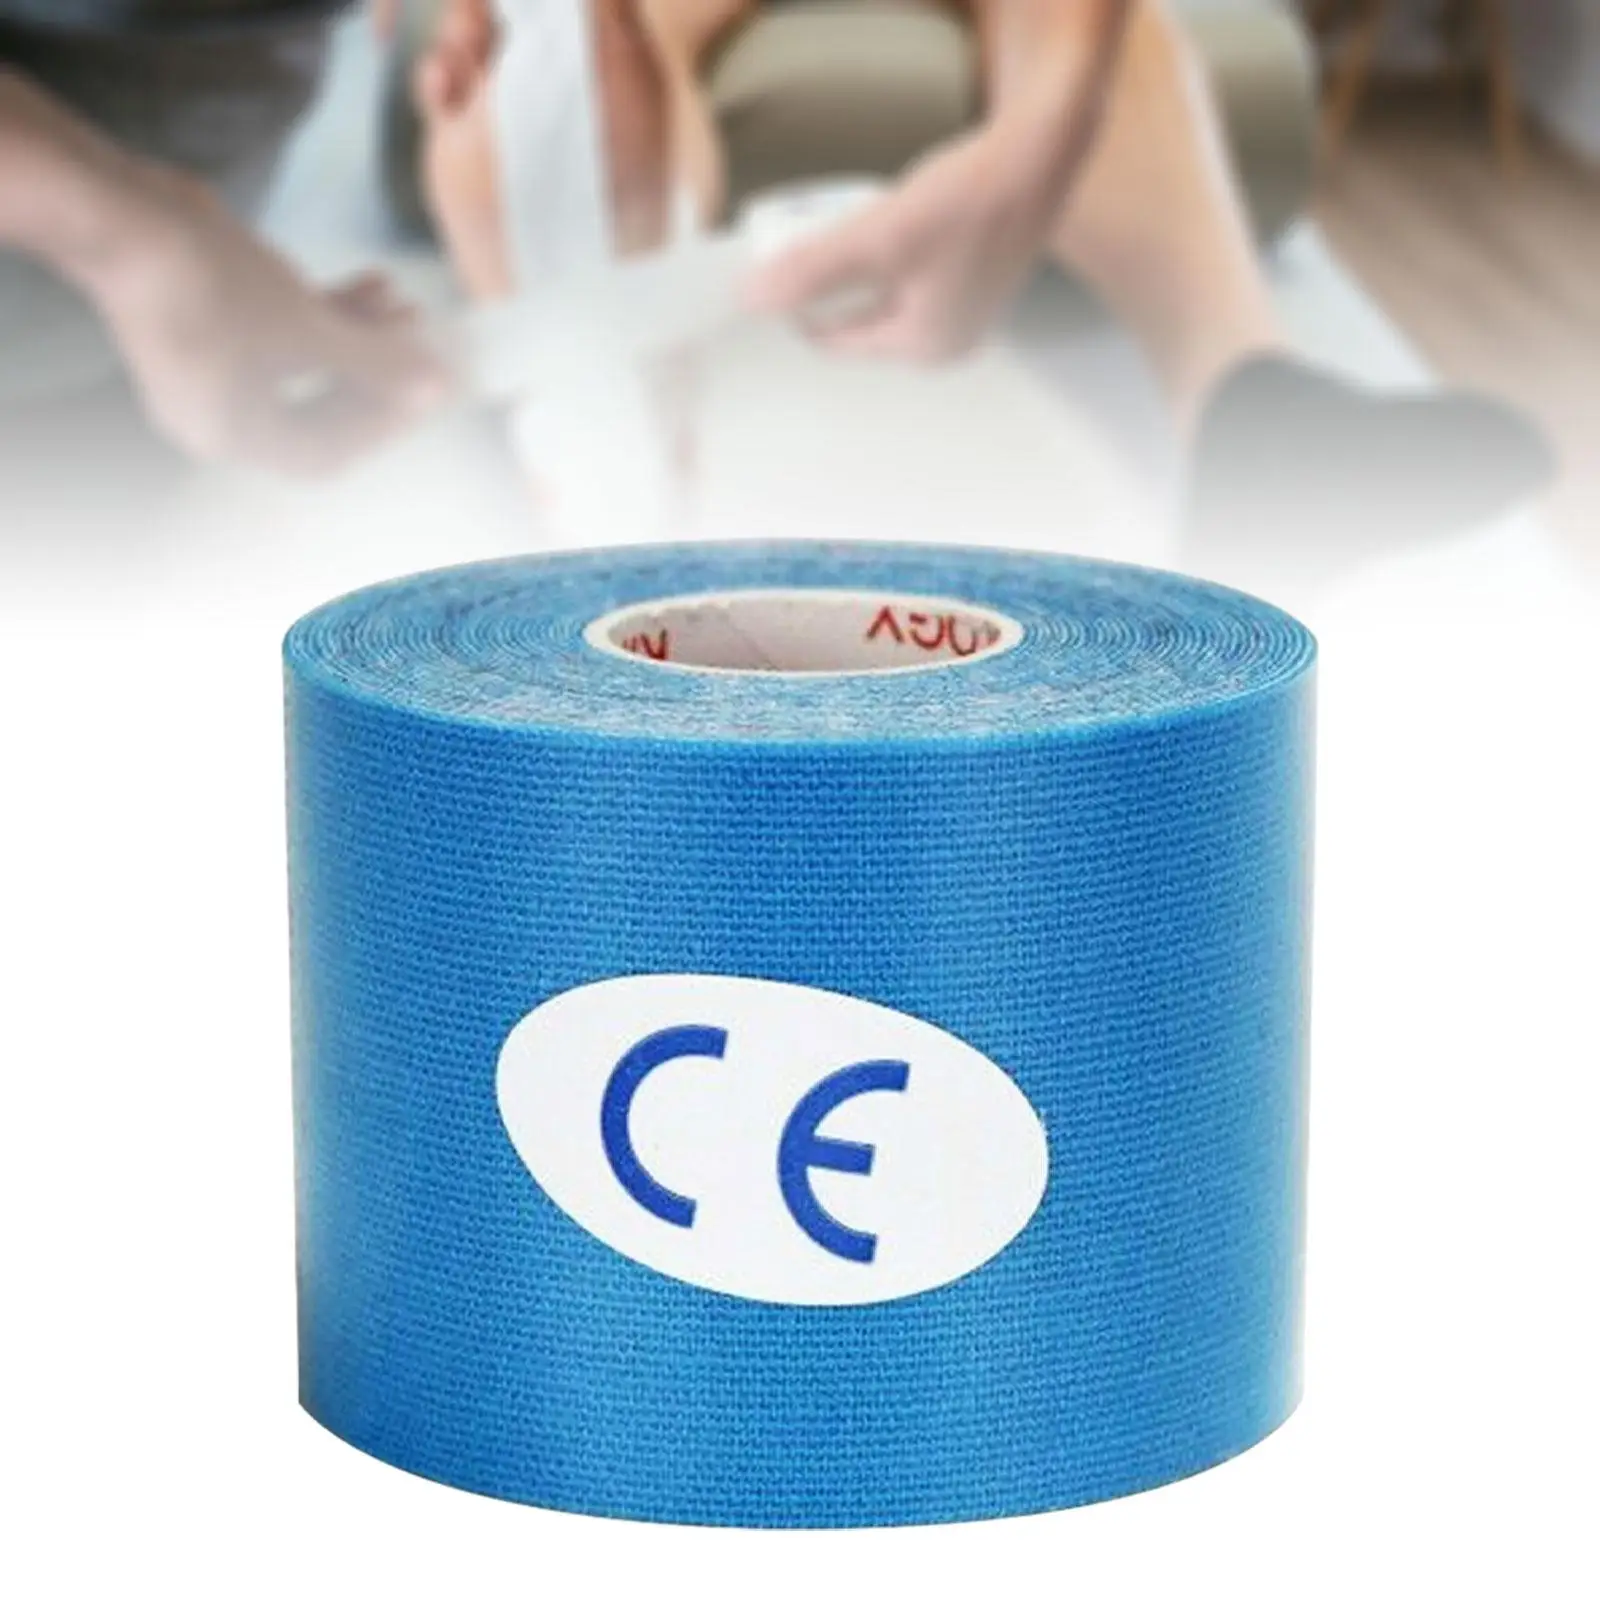 Sports Wrap Tape Elastic Muscle Tape Wrap 5M Roll Waterproof Athletic Tape Protective Tape for Joint Knee Hands Ankles Football